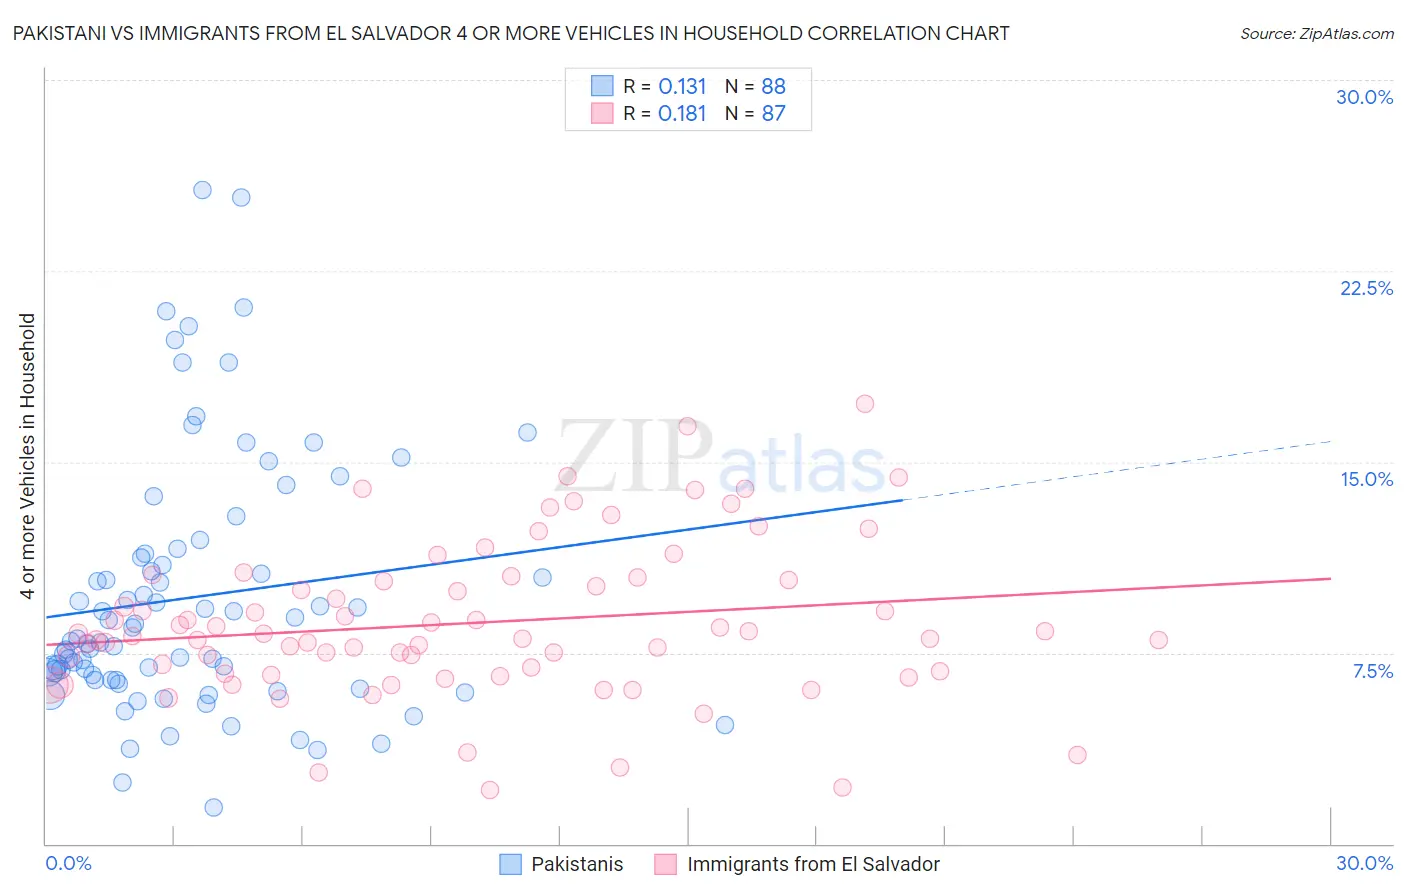 Pakistani vs Immigrants from El Salvador 4 or more Vehicles in Household